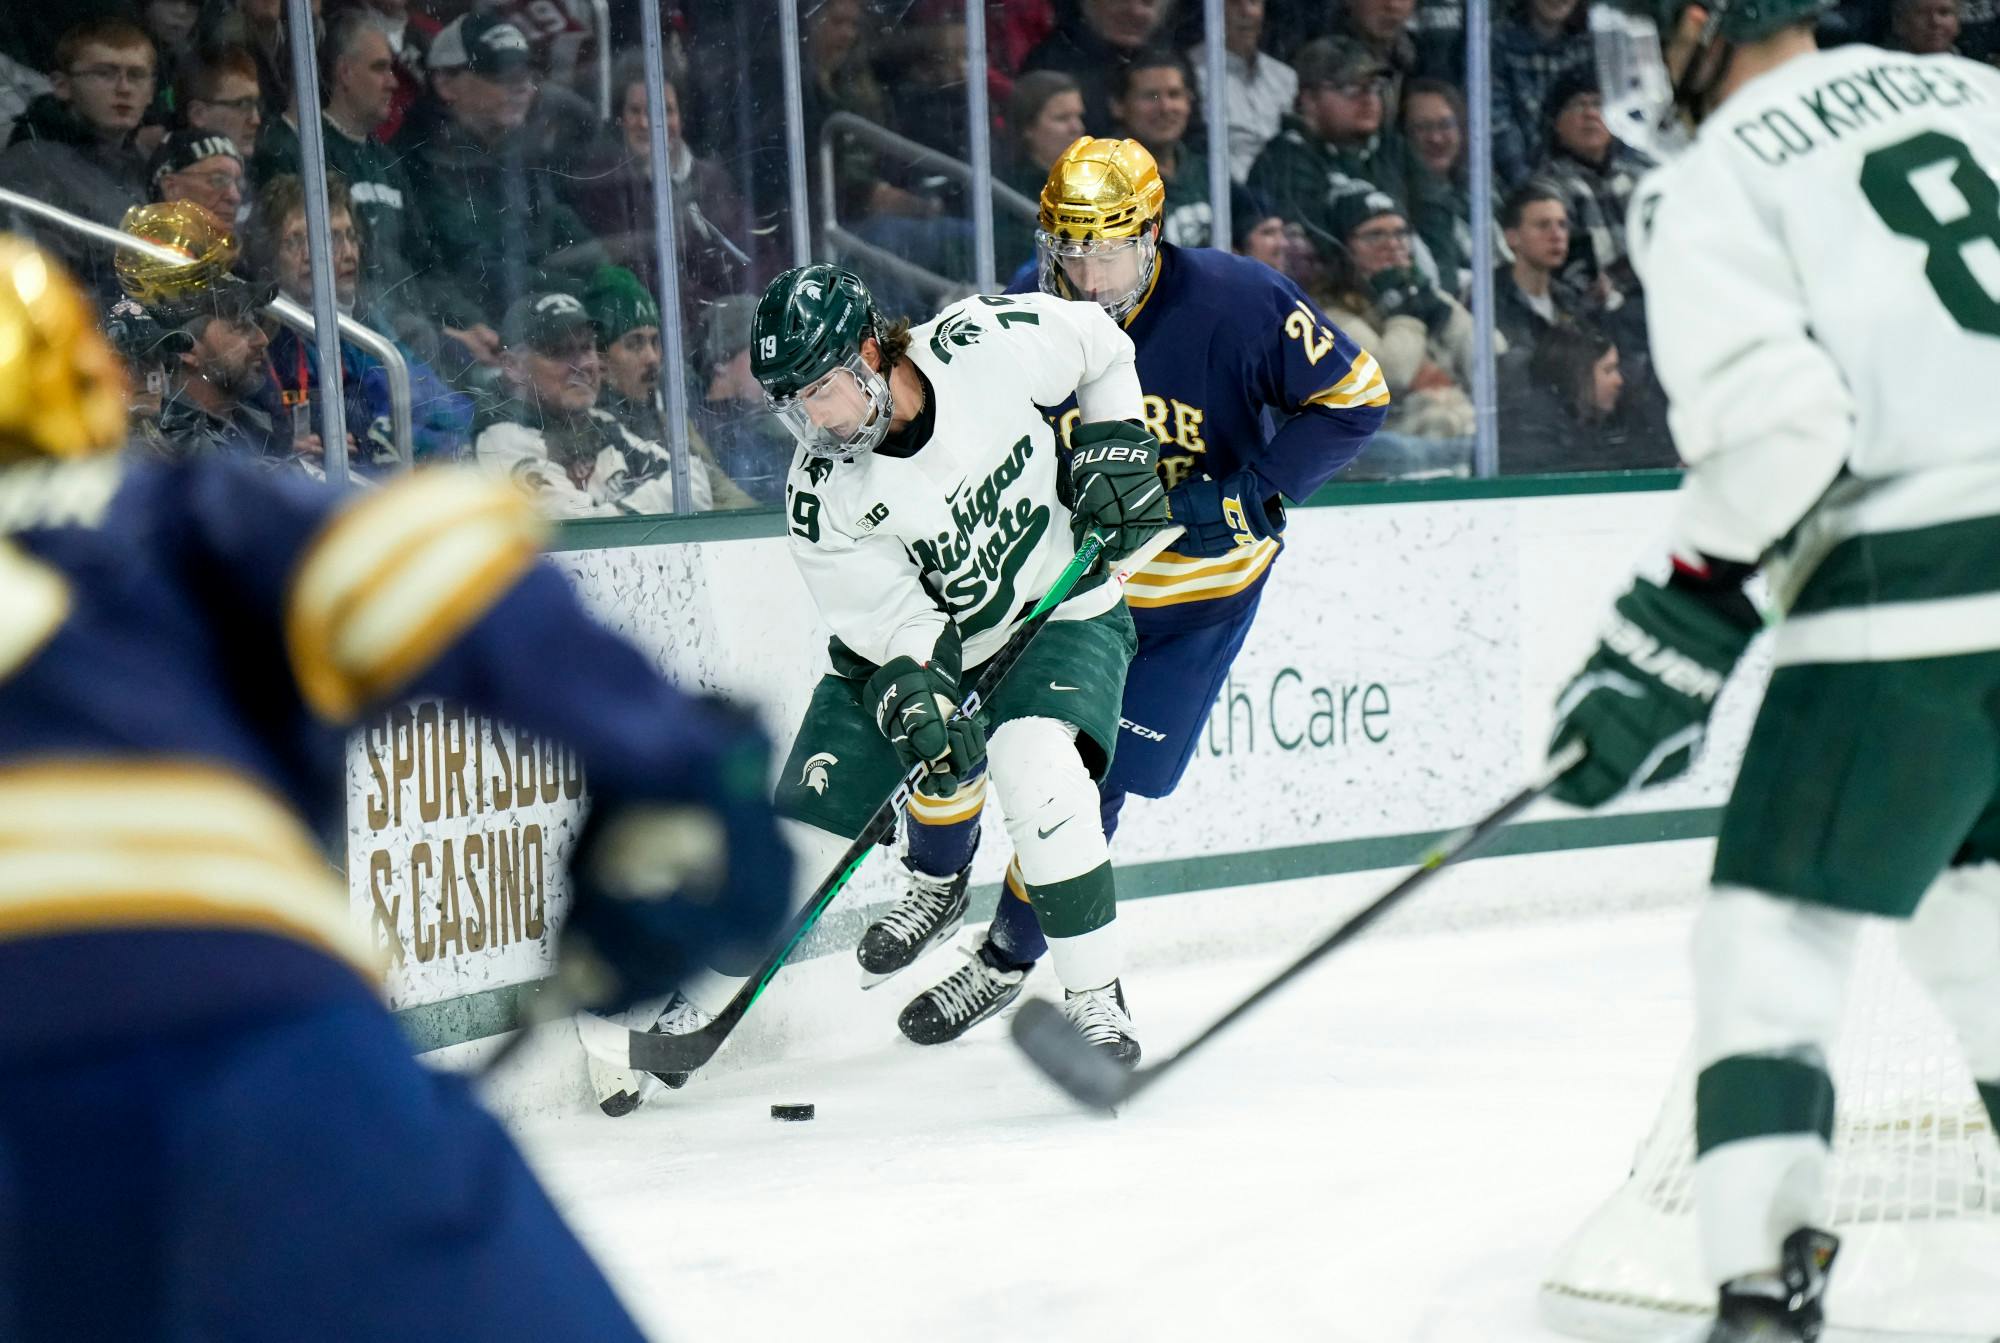 <p>Senior forward Nicolas Müller (19) dribbles the puck during a game against Notre Dame at Munn Ice Arena on Feb. 3, 2023. The Spartans defeated the Fighting Irish 3-0.</p>